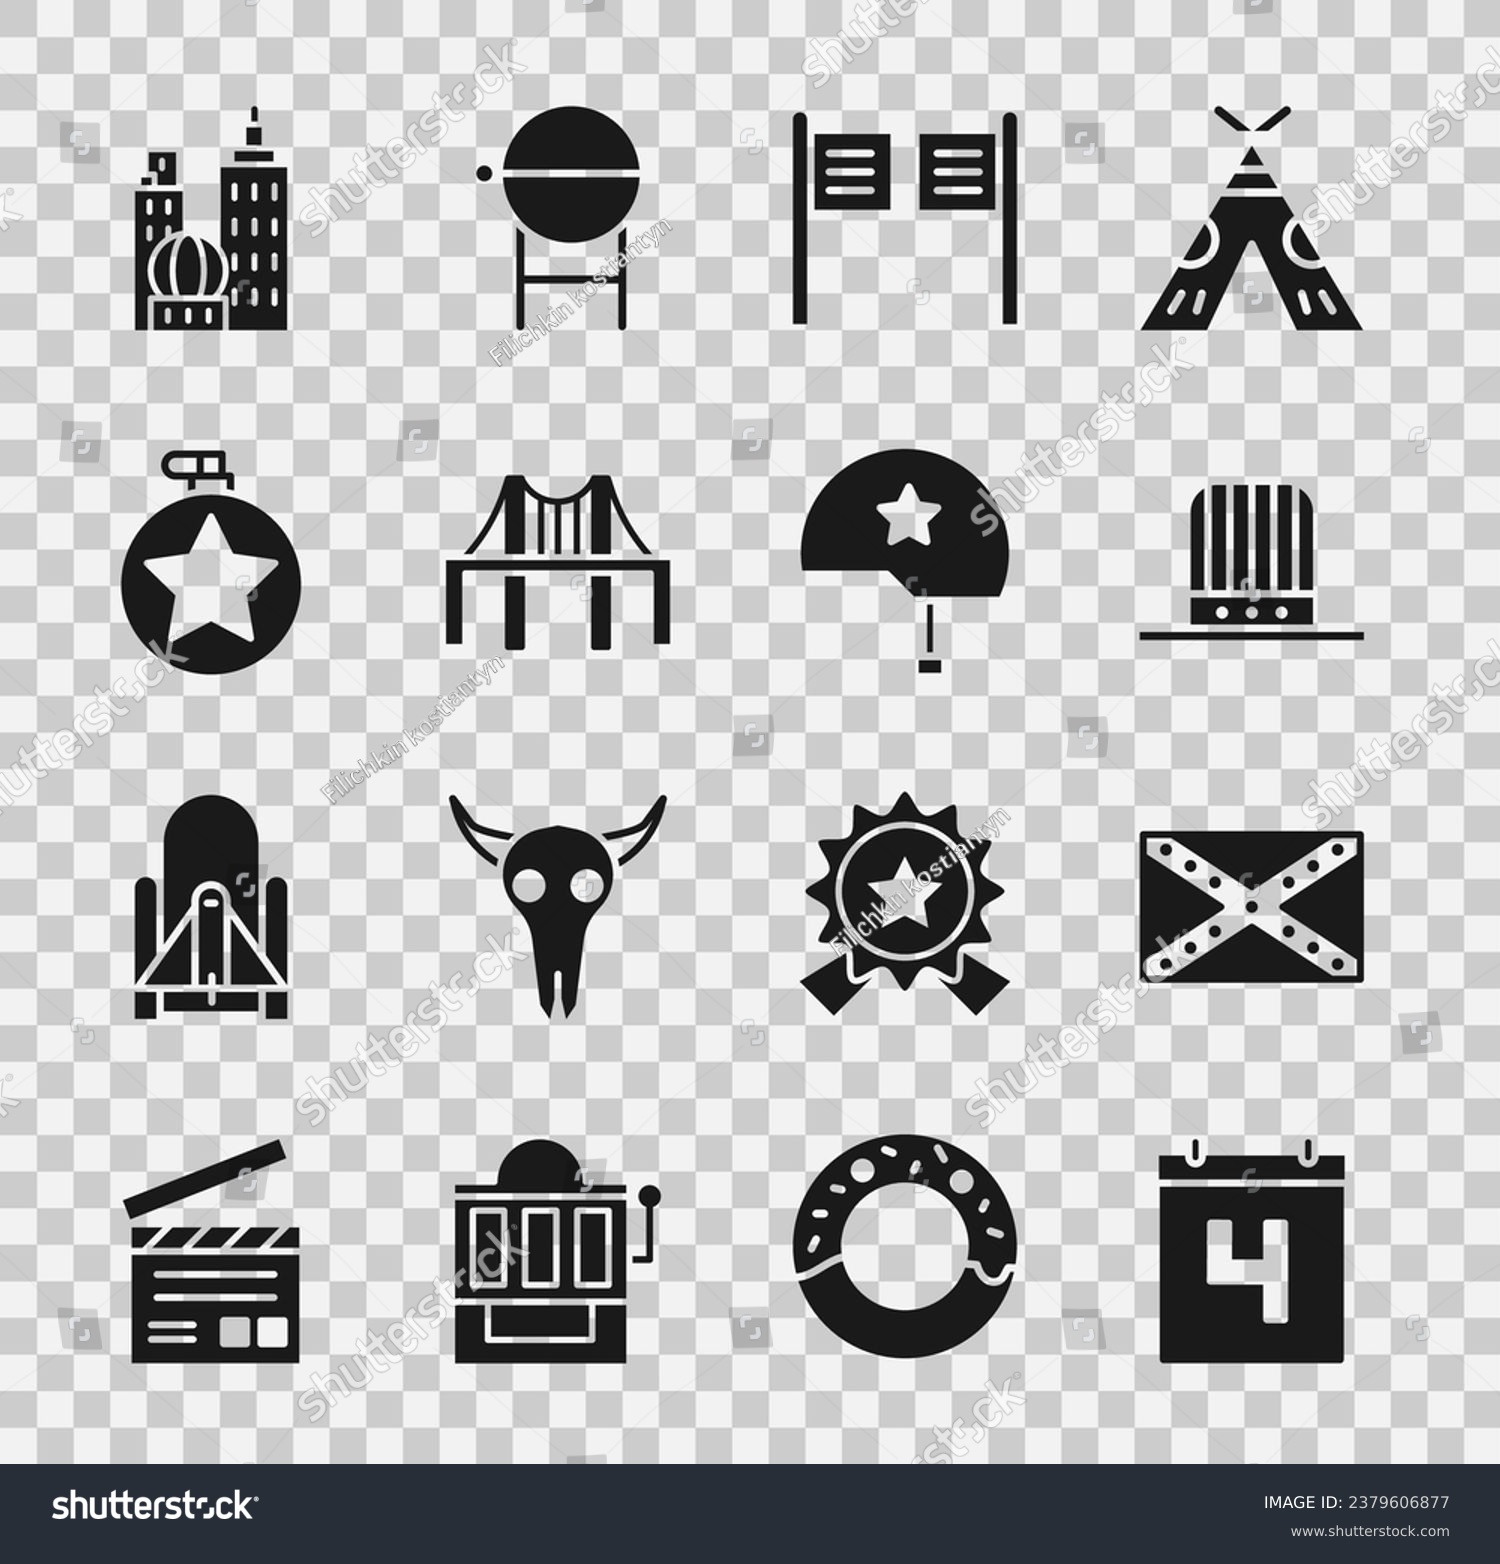 SVG of Set Calendar with date July 4, Flag Confederate, Patriotic American top hat, Saloon door, Golden gate bridge, Canteen water bottle, City landscape and Military helmet icon. Vector svg